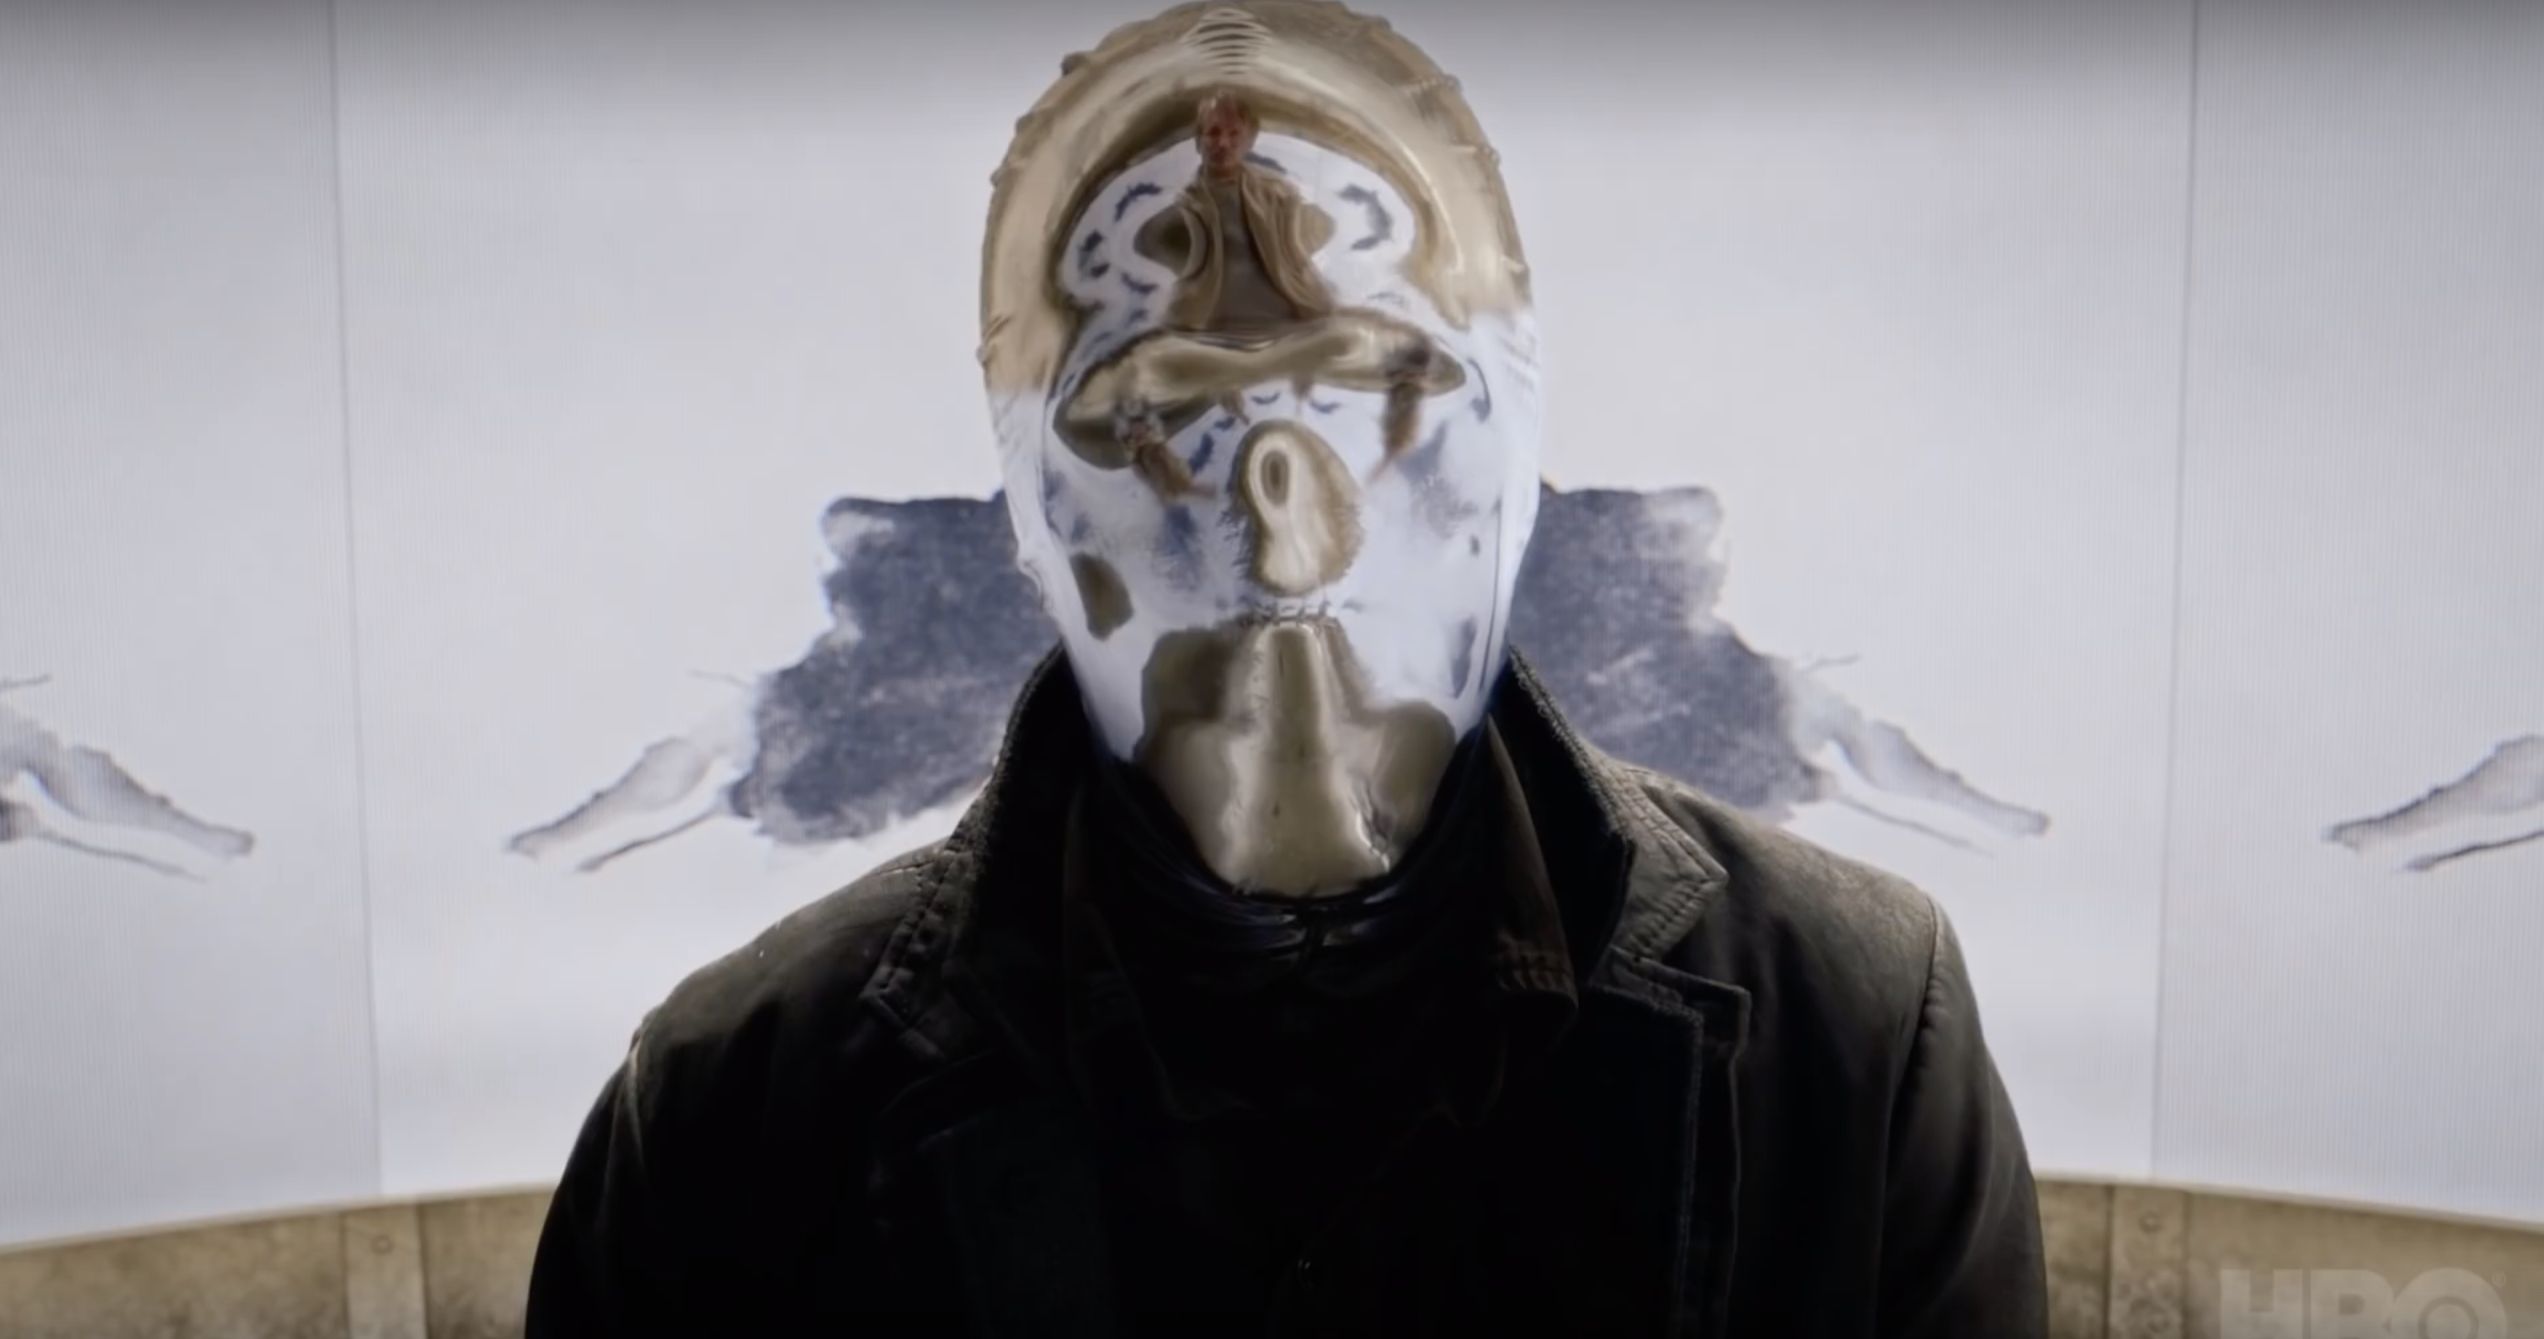 Full Watchman Trailer Goes Behind the Masks of HBO's New DC Series